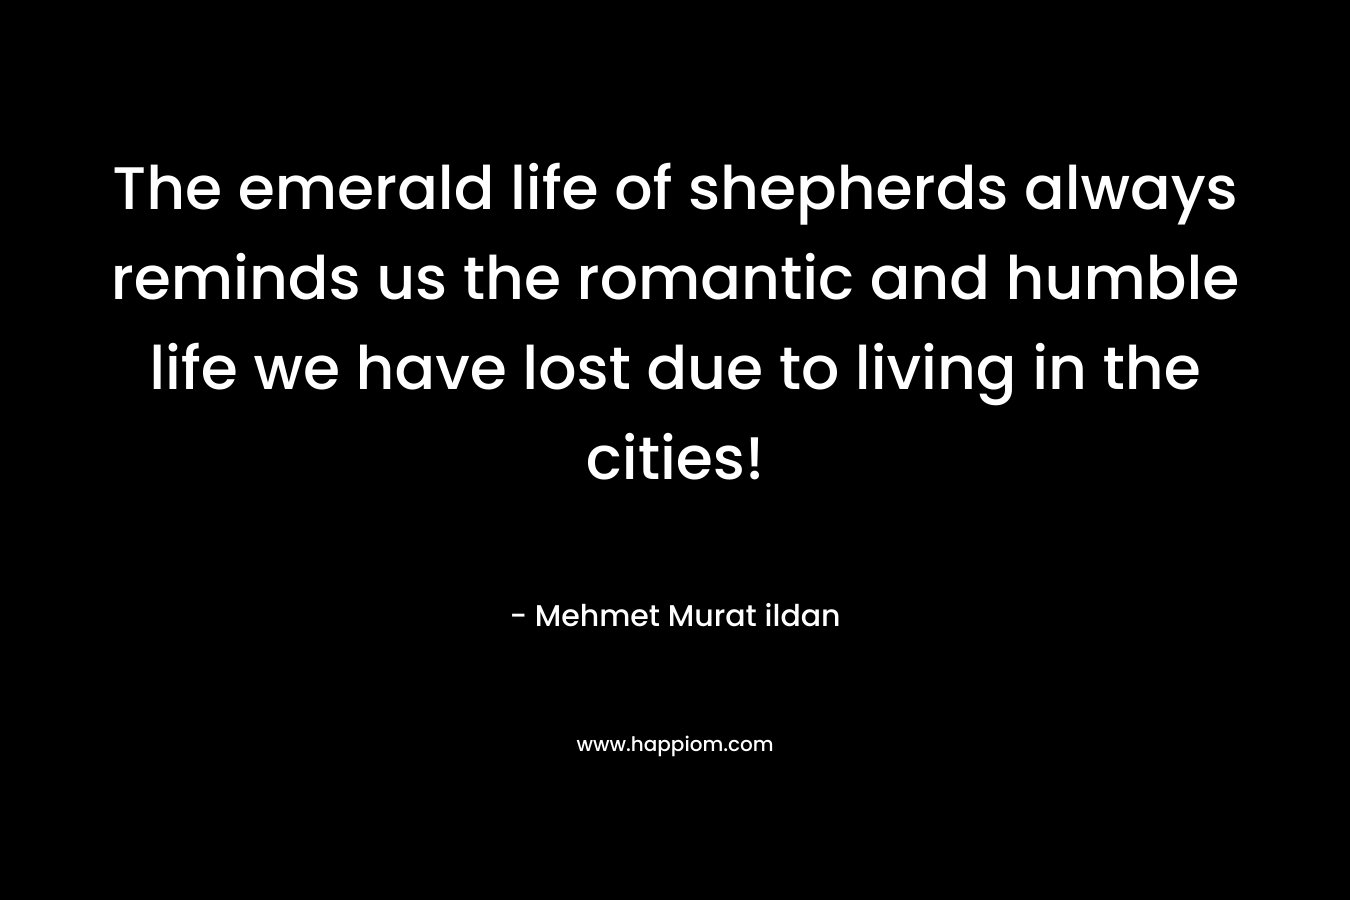 The emerald life of shepherds always reminds us the romantic and humble life we have lost due to living in the cities! – Mehmet Murat ildan